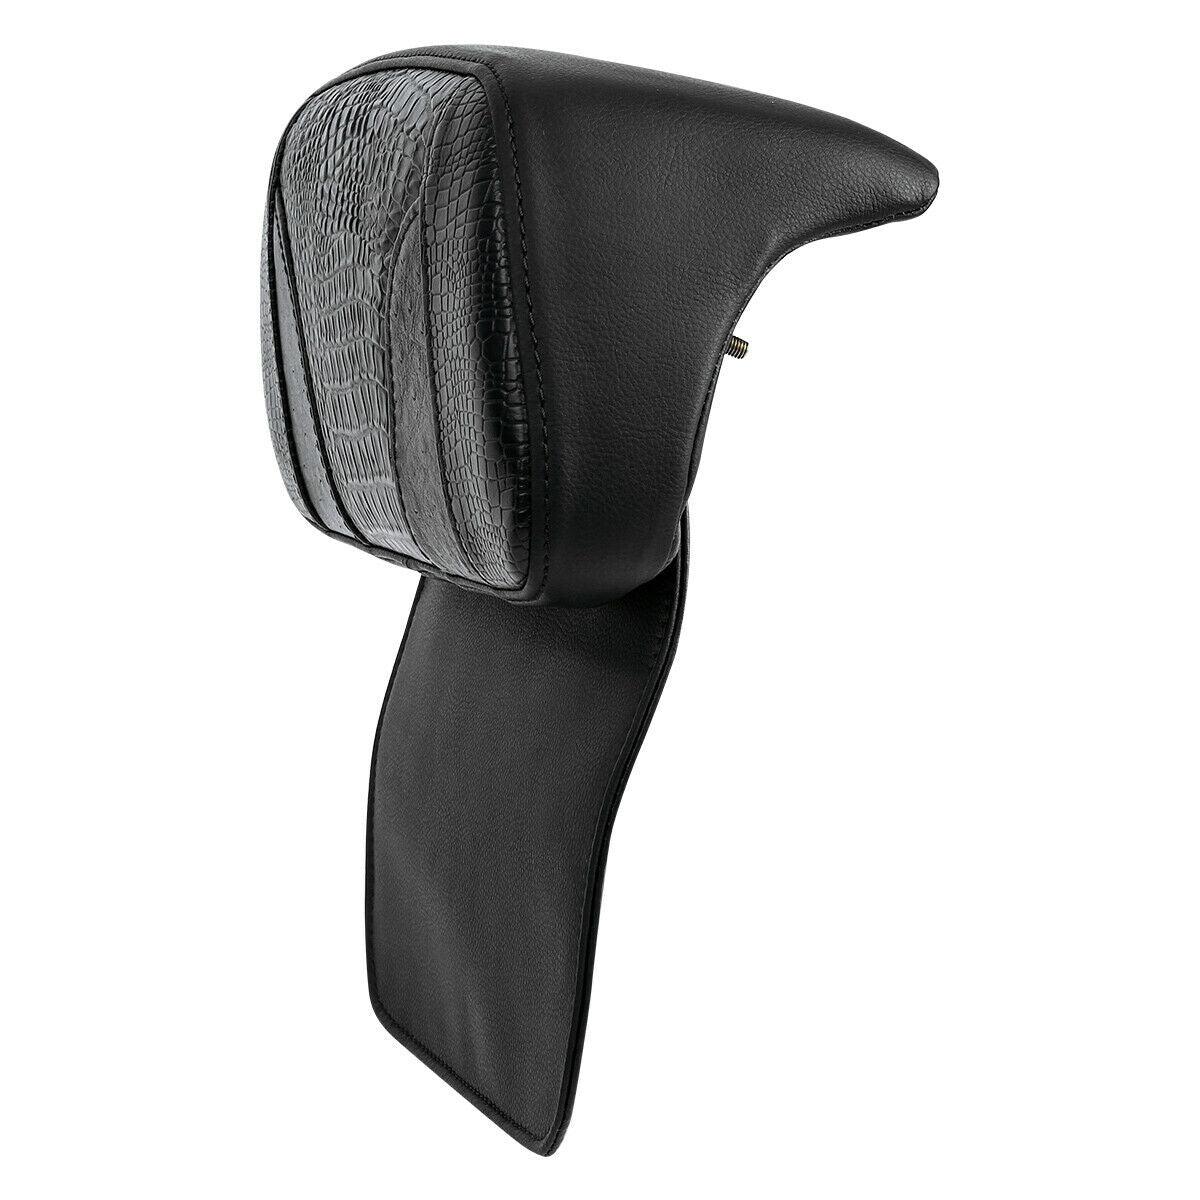 Razor Chopped Backrest Pad Fit For Harley Tour Pak Touring Street Glide 2014-Up - Moto Life Products